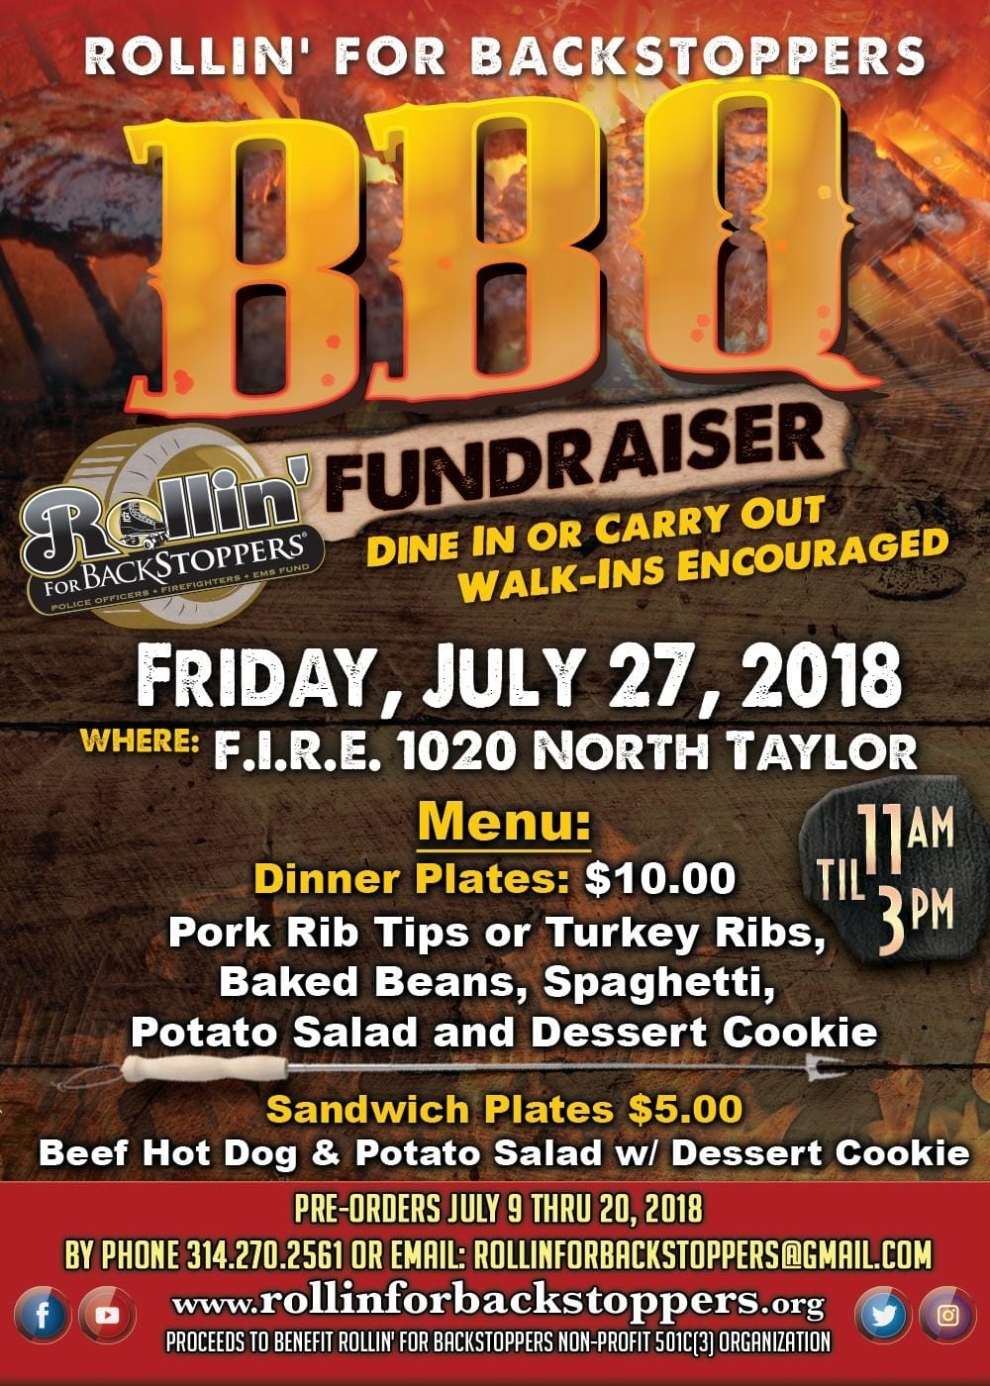 Rfb Bbq Flyer 2018 - The Backstoppers, Inc. Intended For Bbq Fundraiser Flyer Template